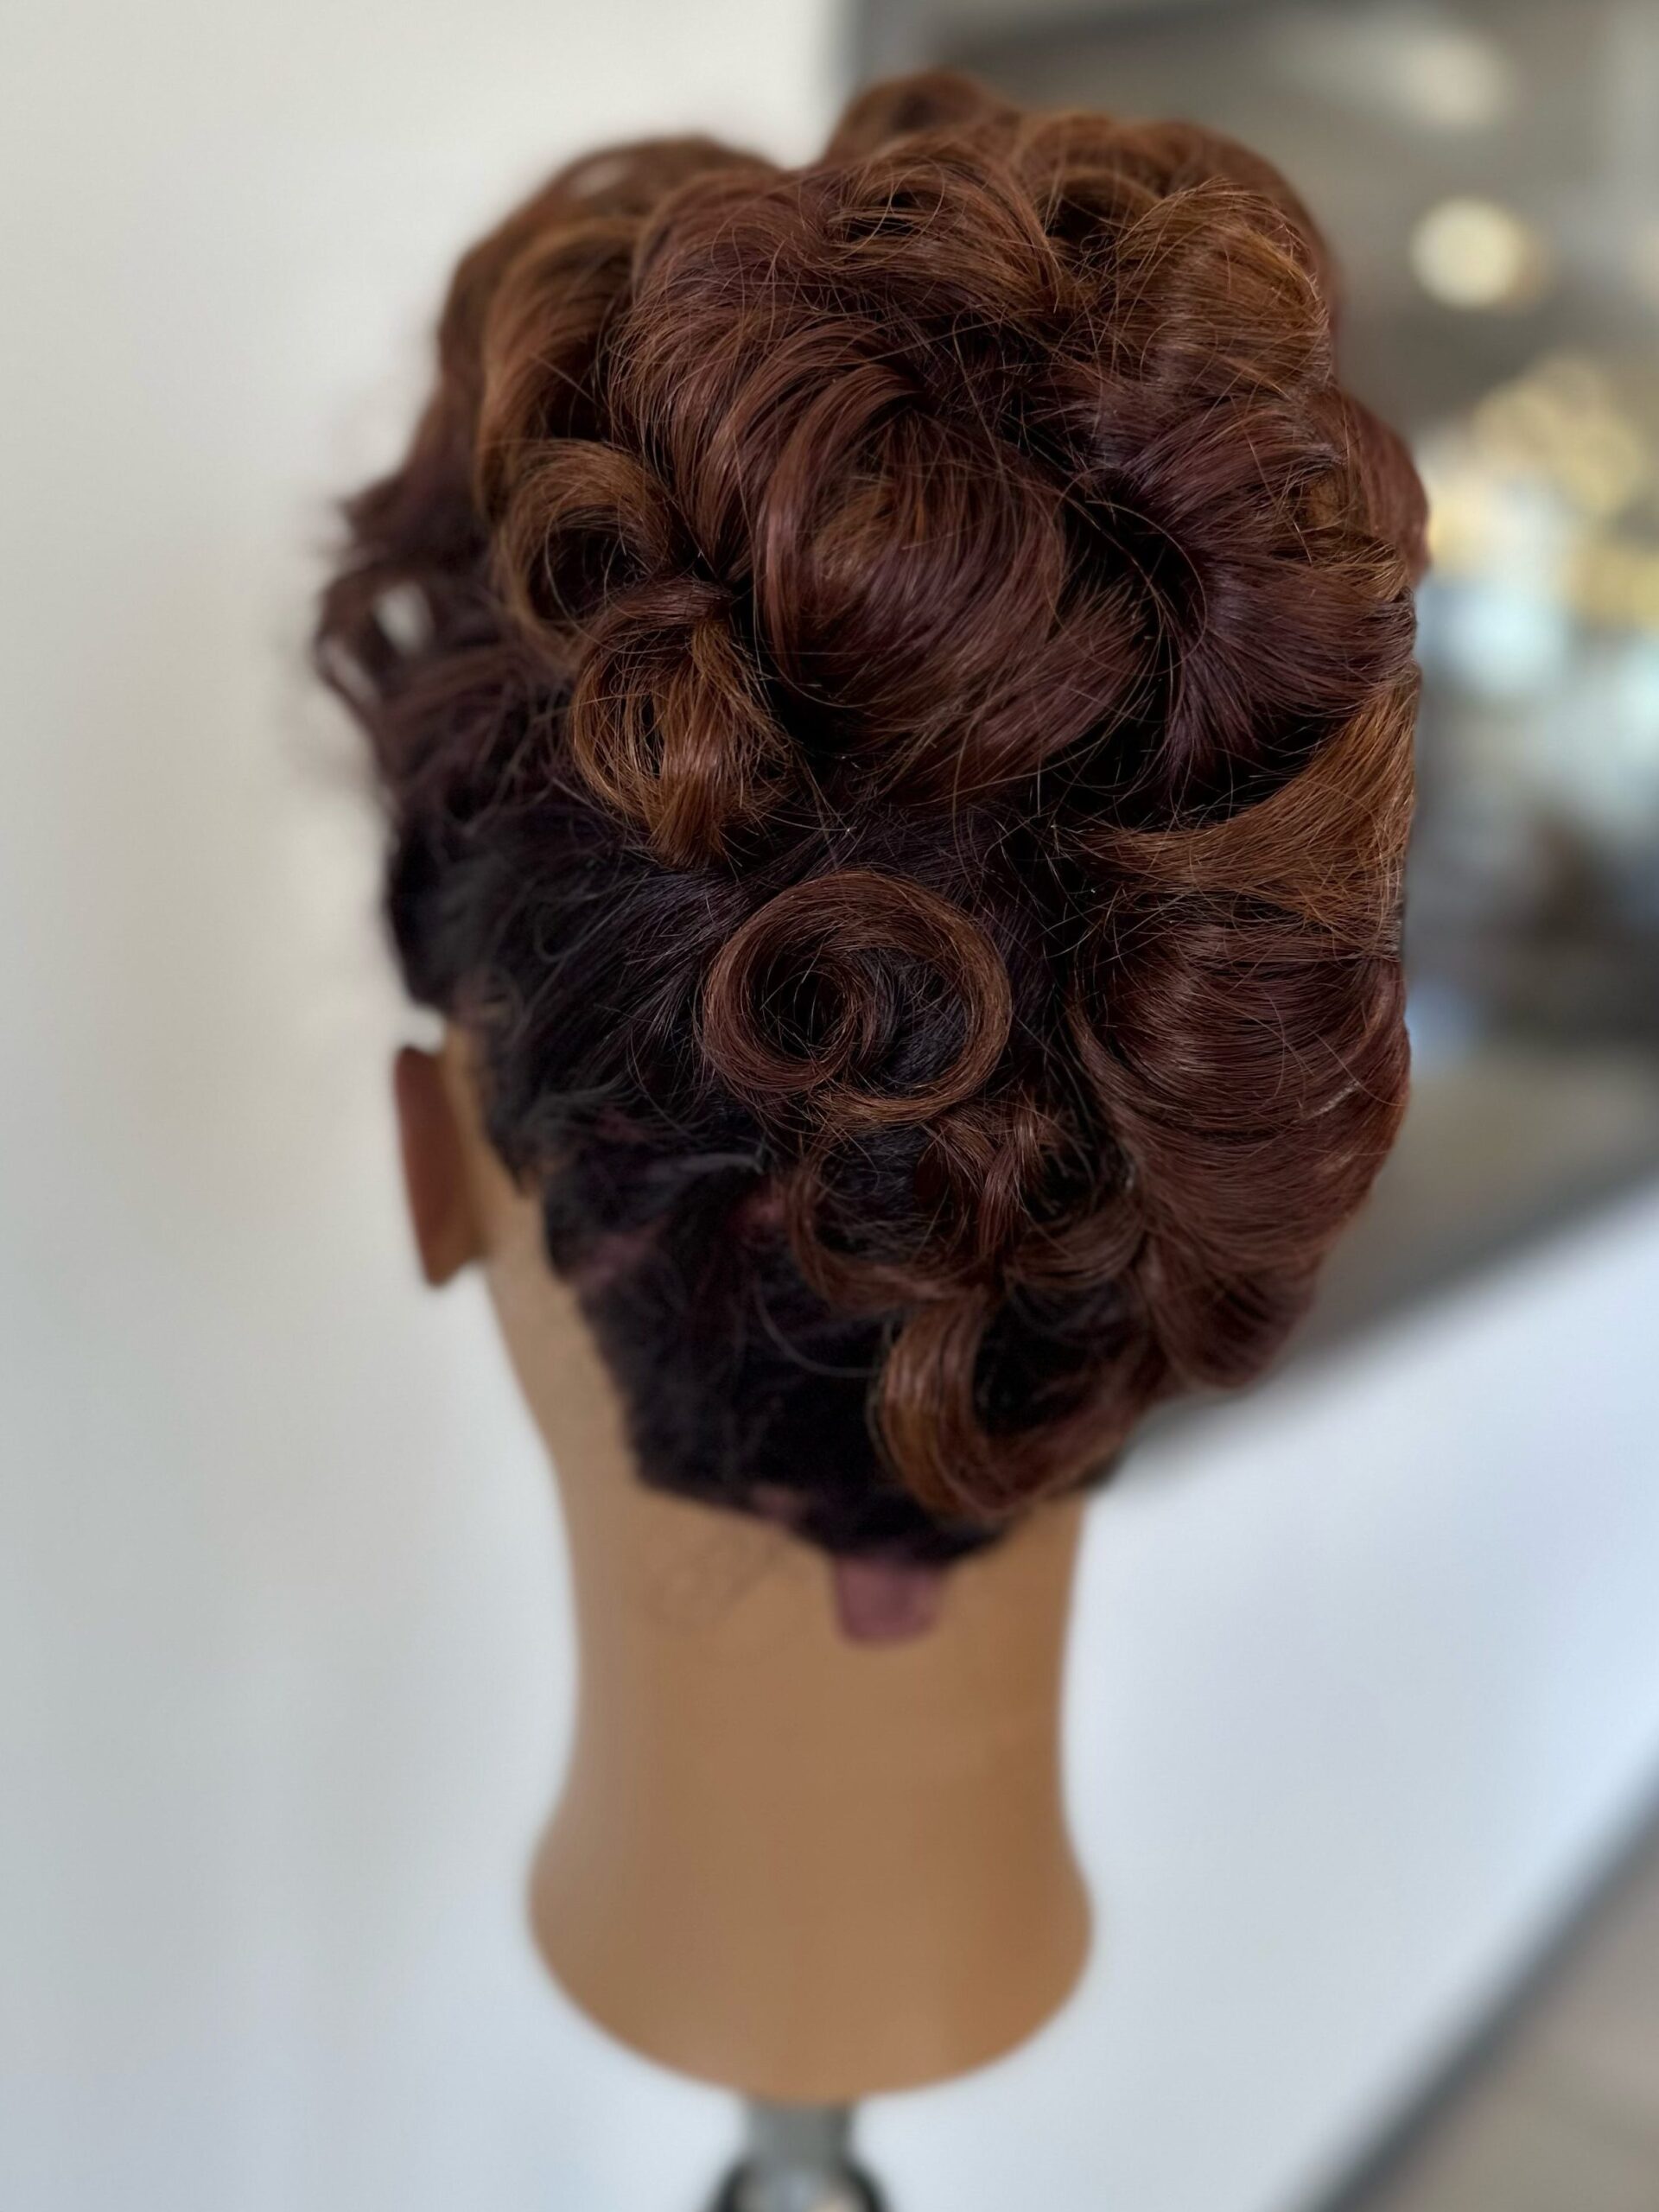 Formal hair for prom or wedding. Hairstyle where mountains of curls are piled on the back and top of head. Mannequin is facing away.